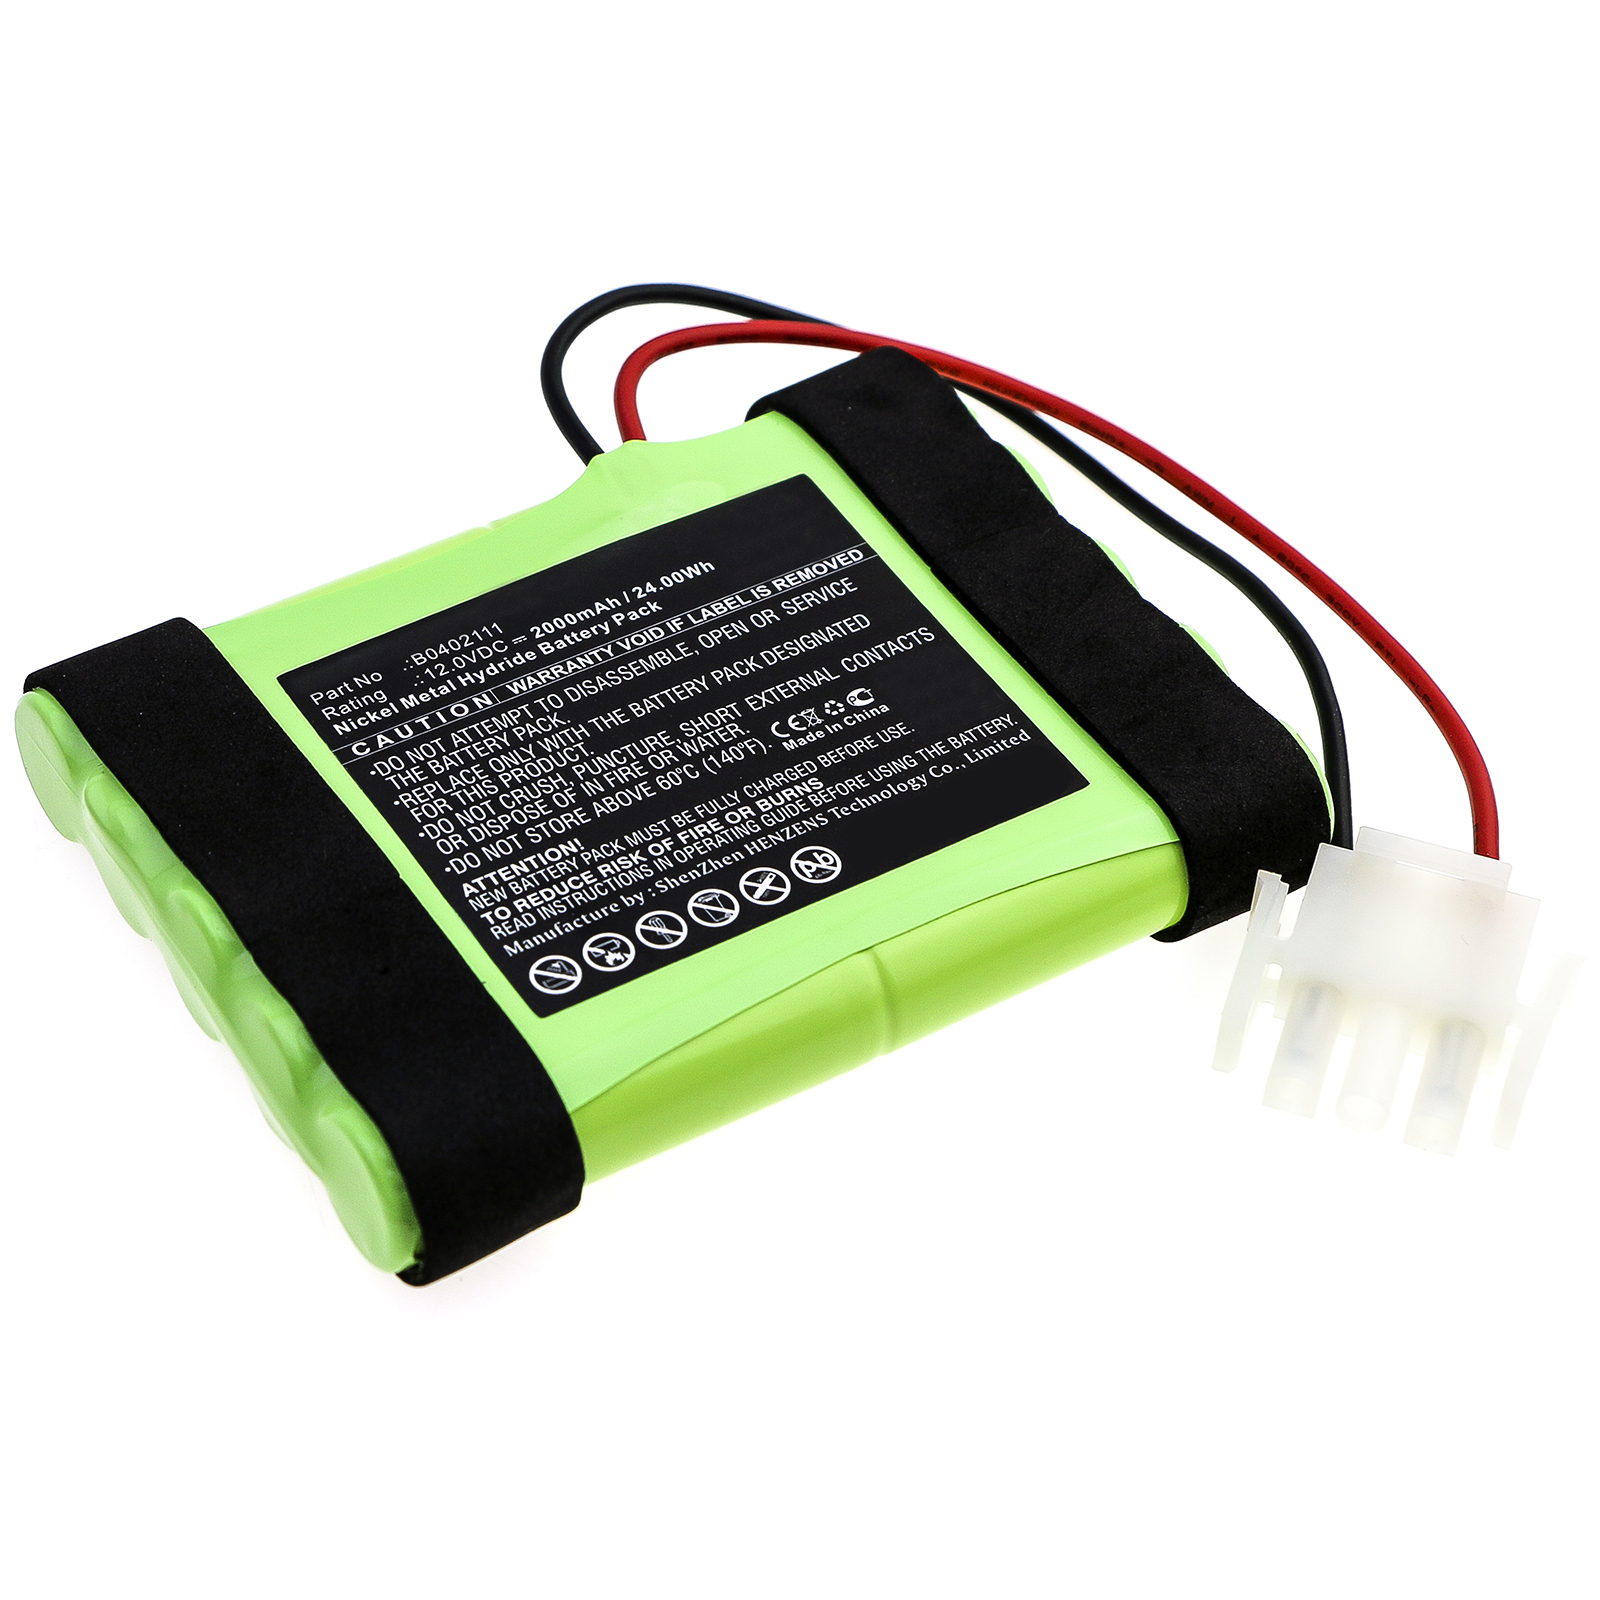 Synergy Digital Medical Battery, Compatible with GE B0402111 Medical Battery (12V, Ni-MH, 2000mAh)